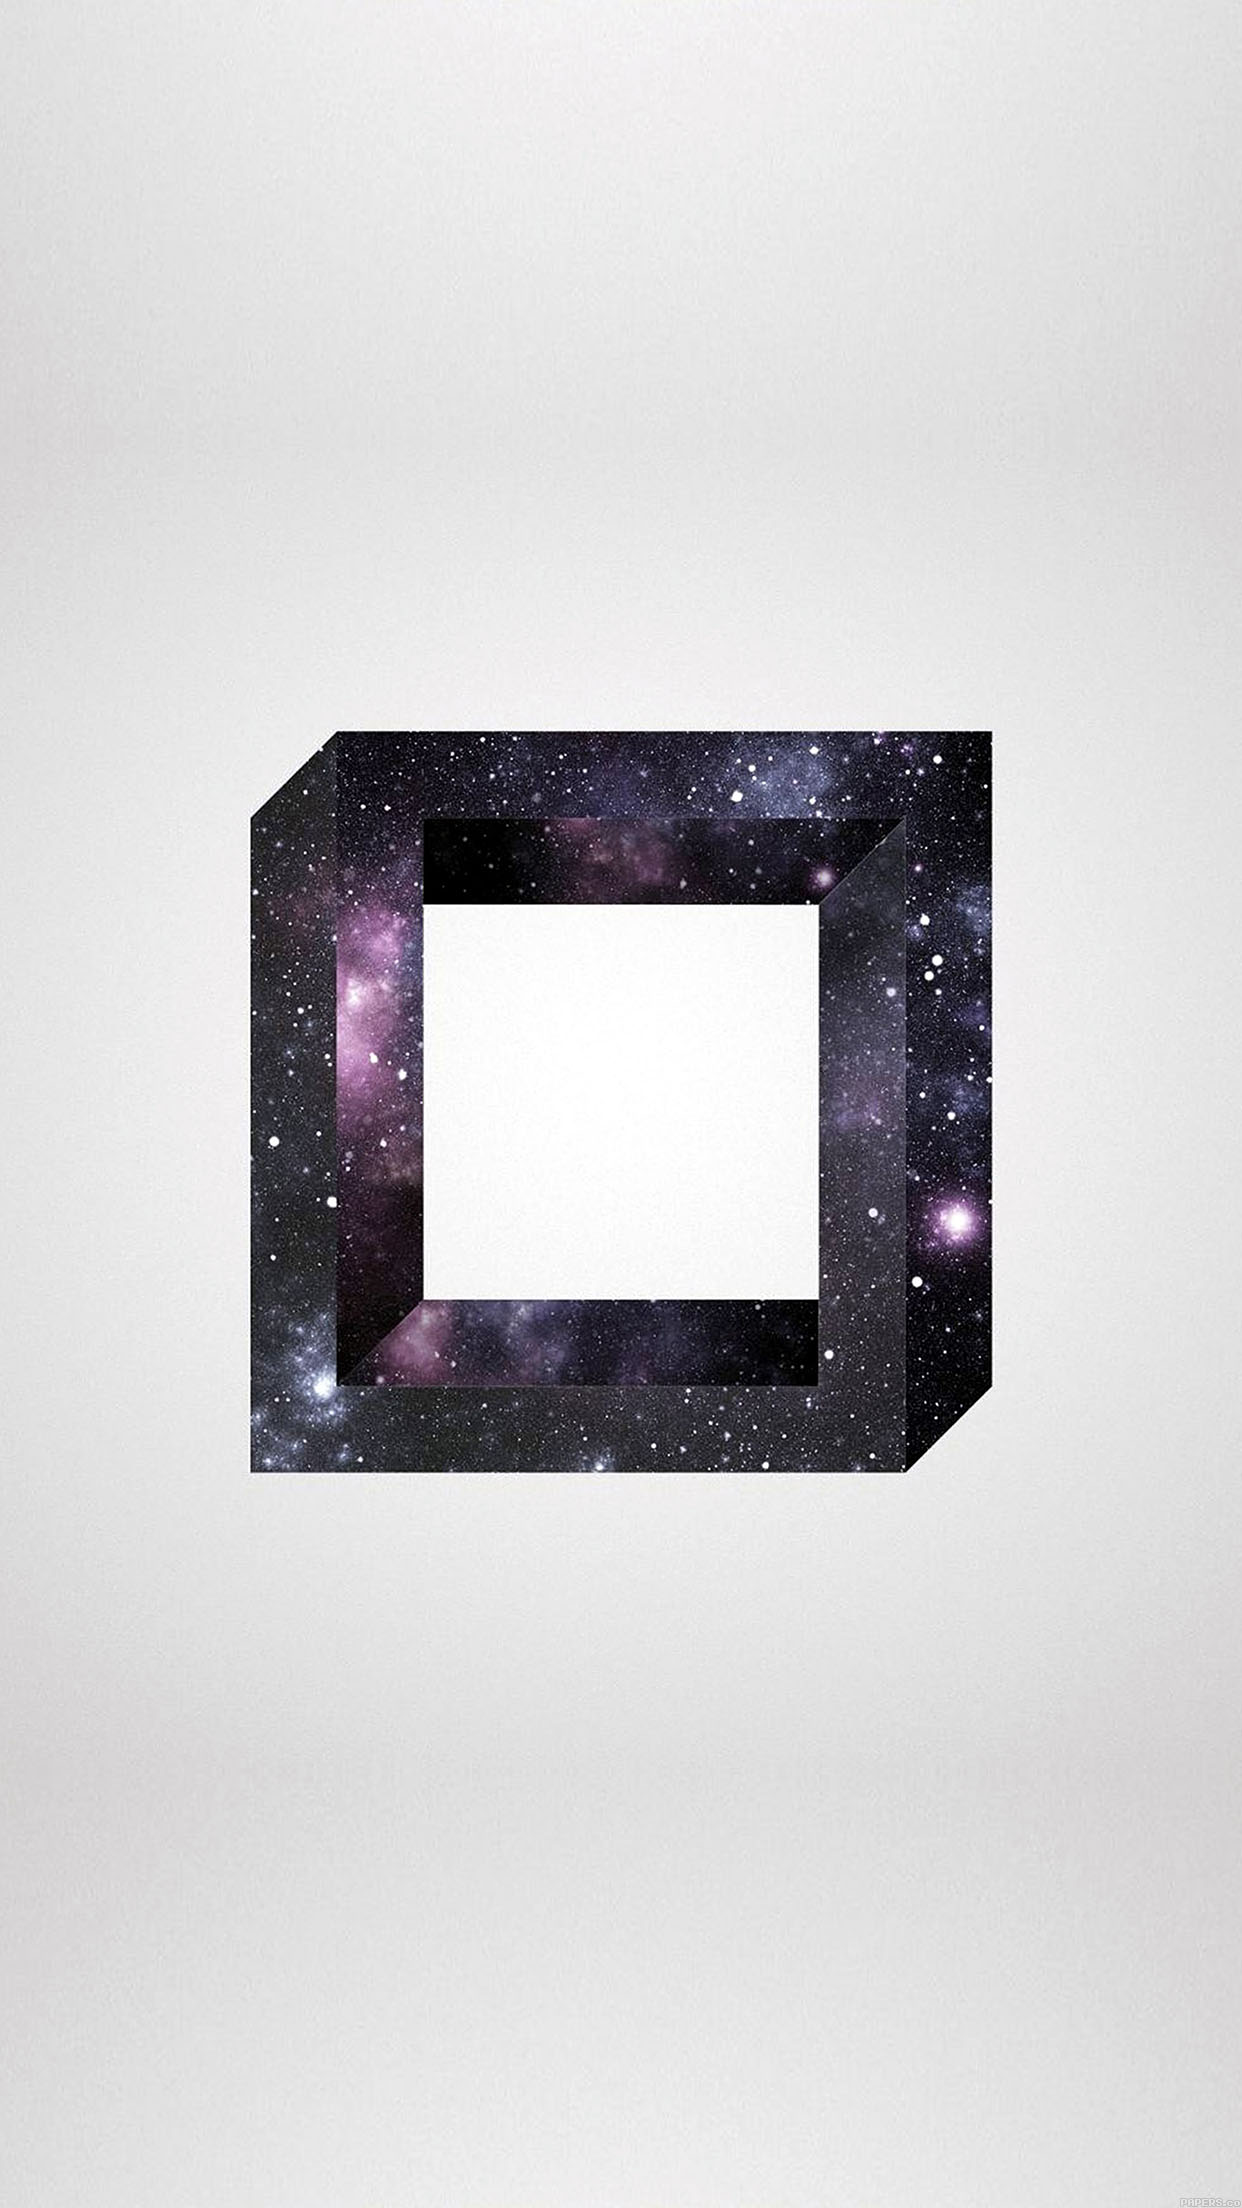 Square Space Art Android wallpaper